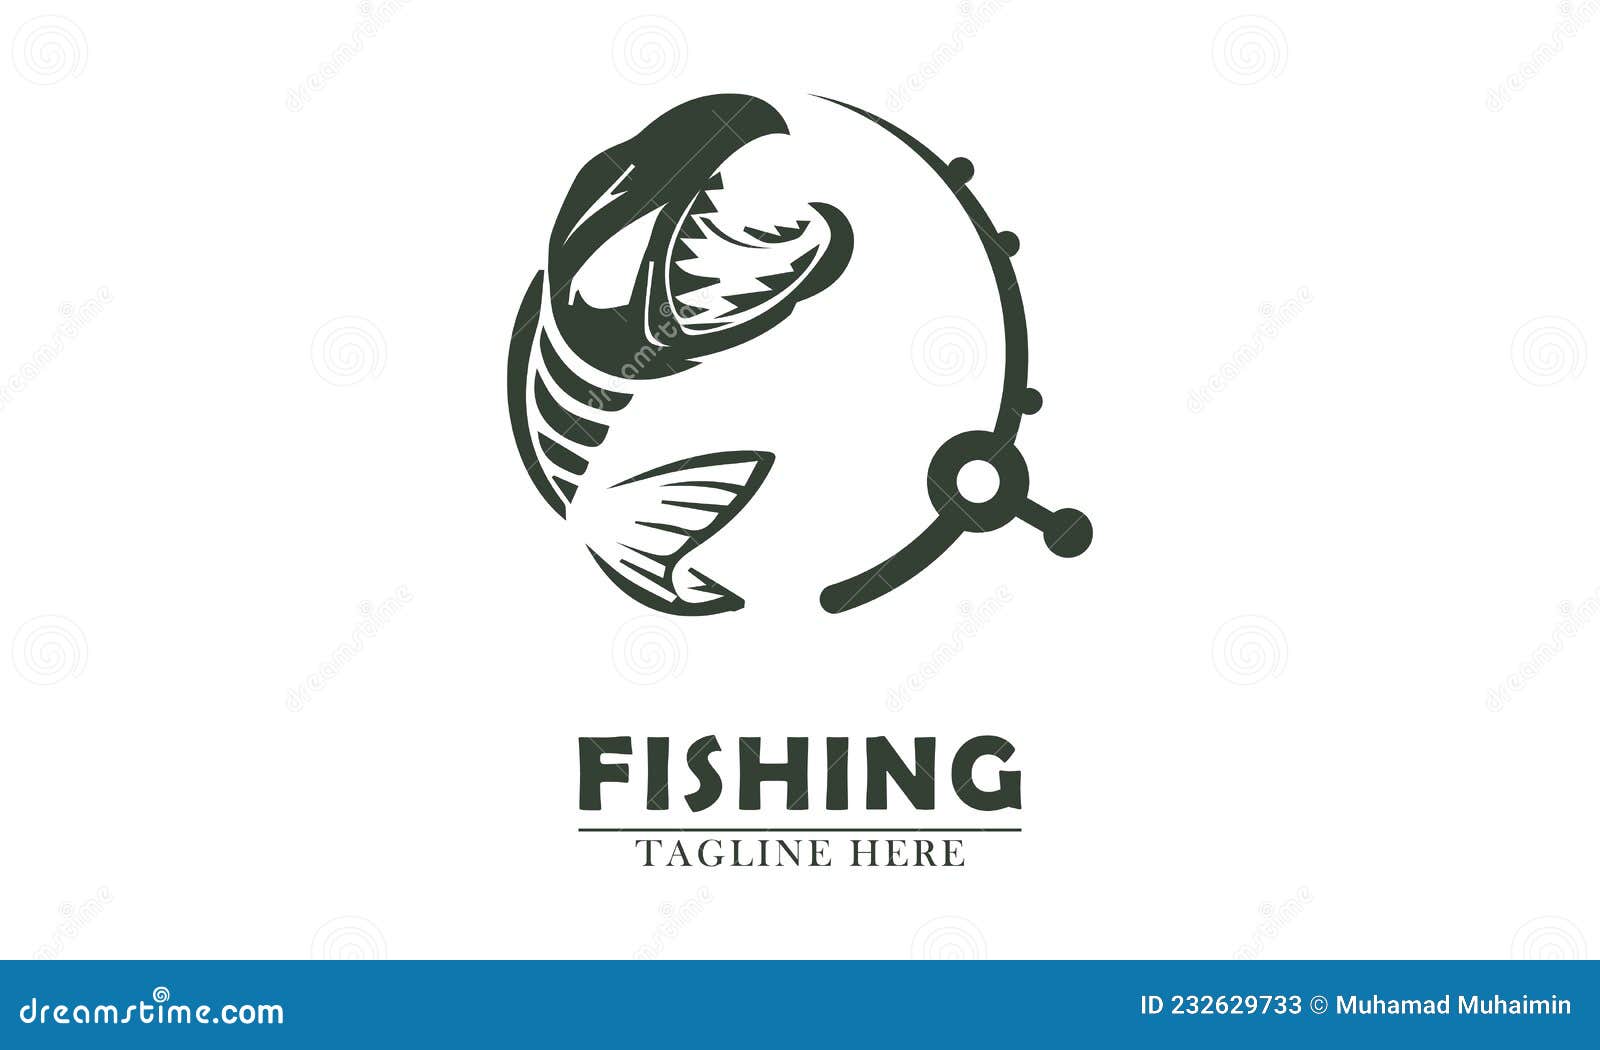 https://thumbs.dreamstime.com/z/fish-monster-fishing-rod-simple-vector-illustration-suitable-hobby-abstract-design-template-232629733.jpg